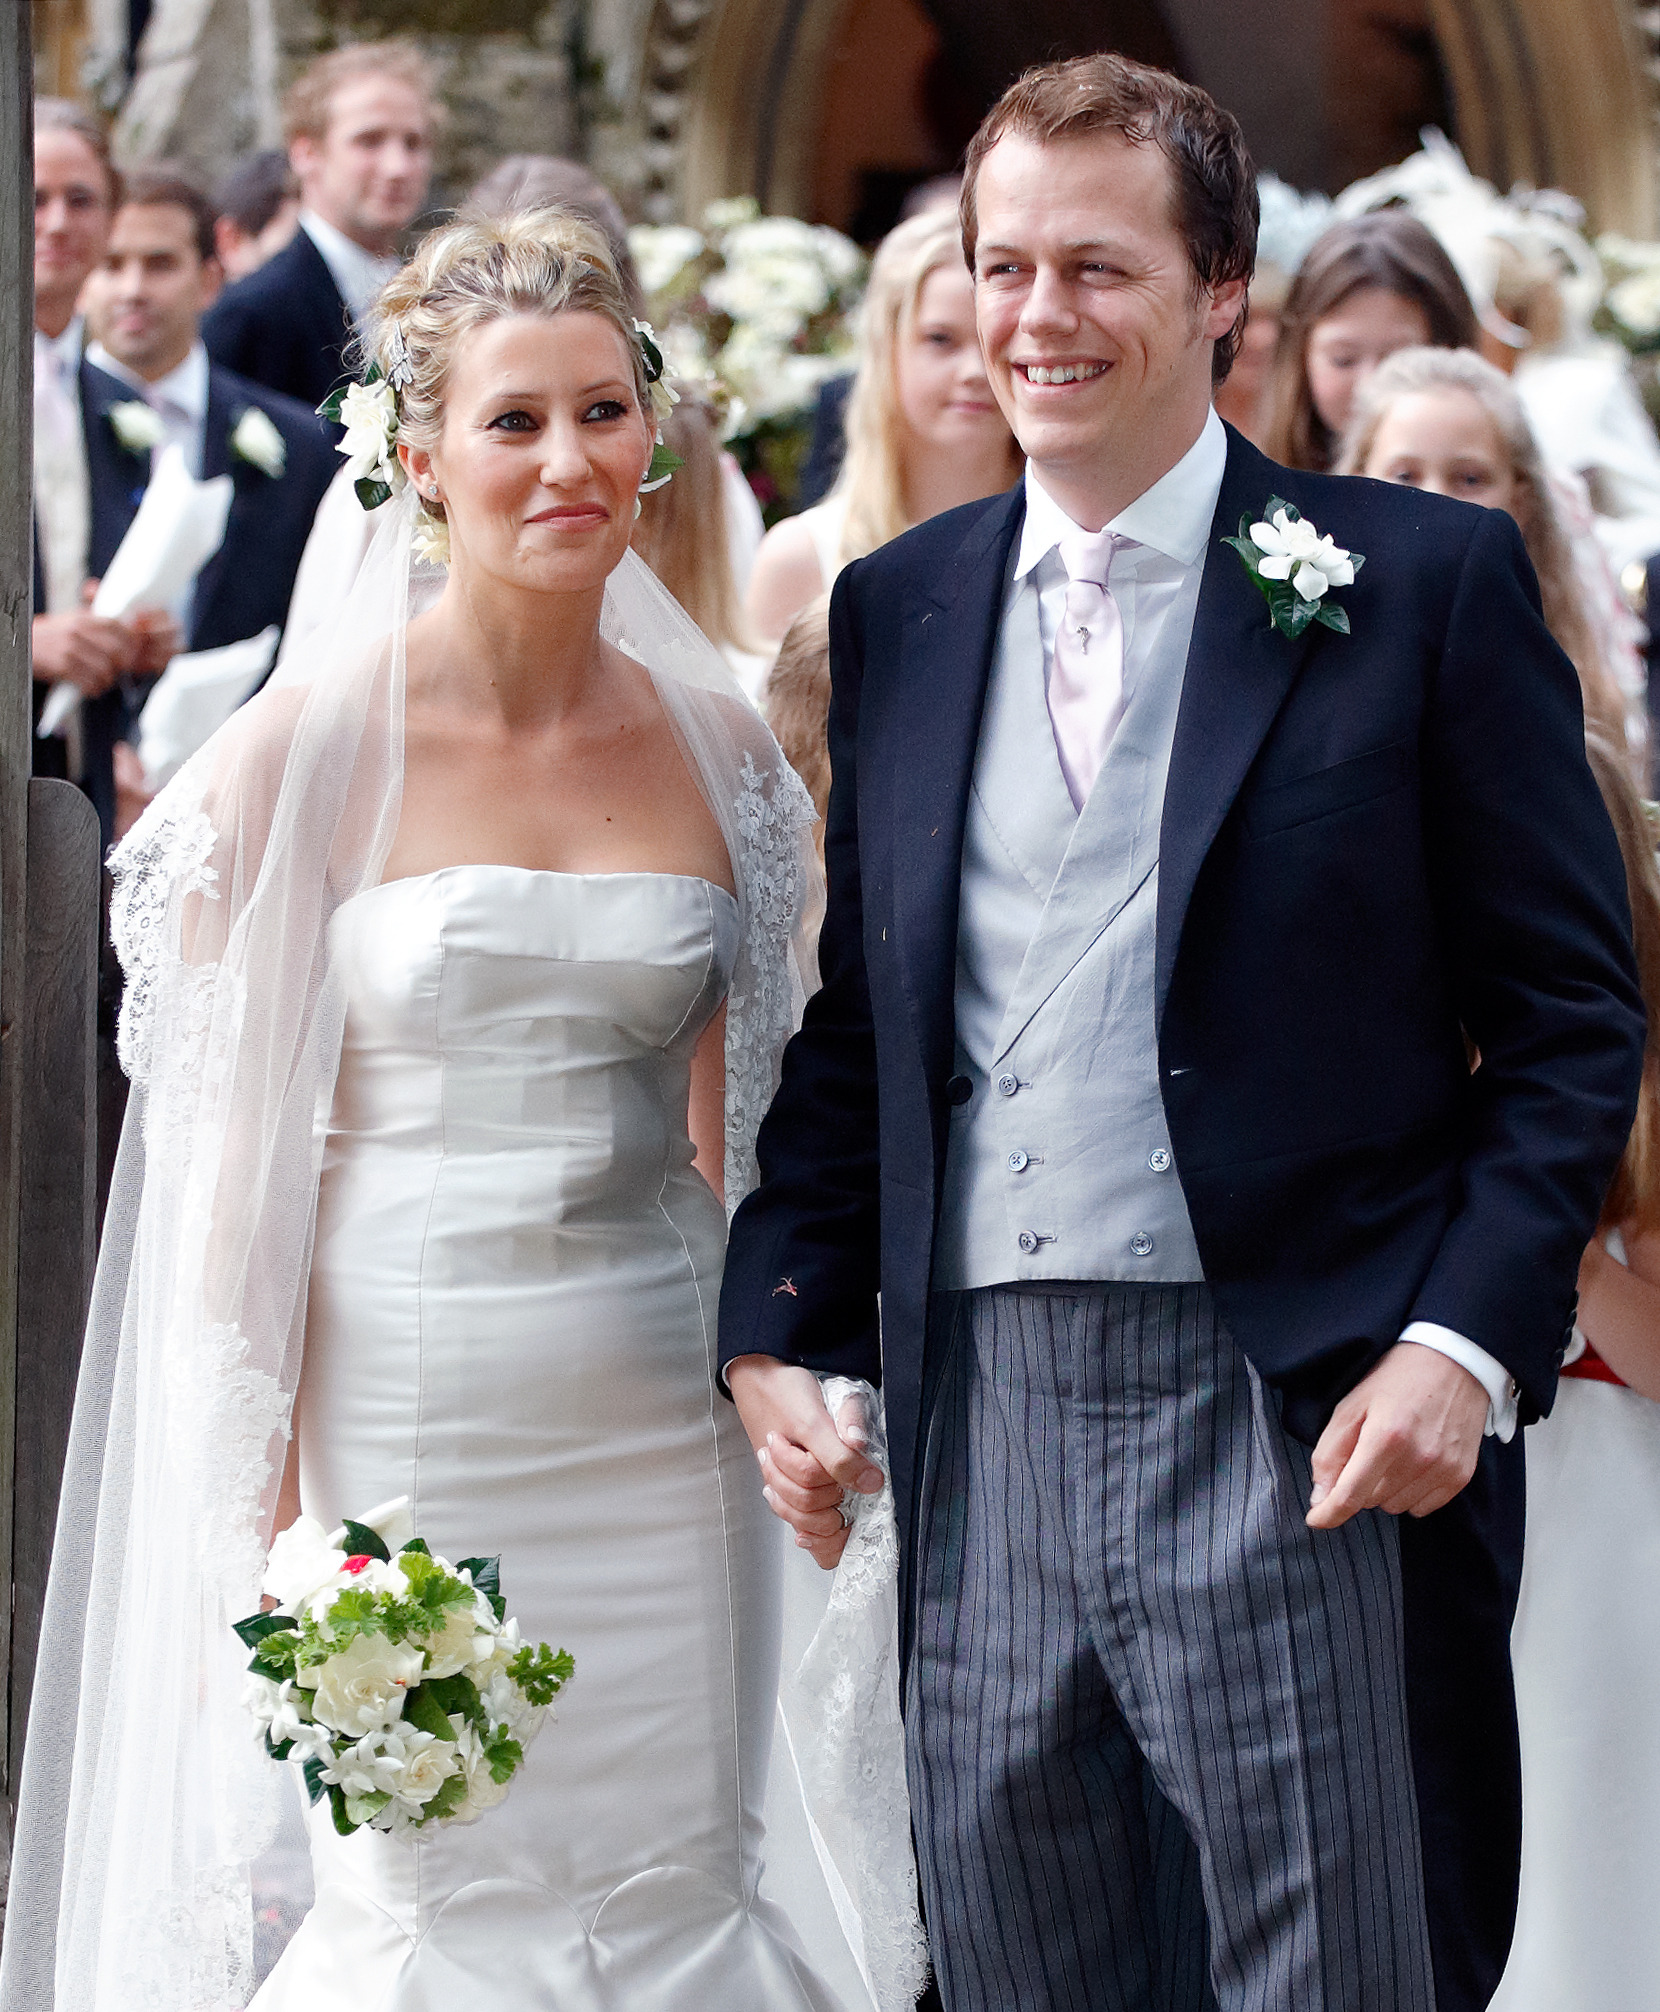 Sara Buys and Tom Parker Bowles's wedding on September 10, 2005, in Rotherfield Greys, England. | Source: Getty Images